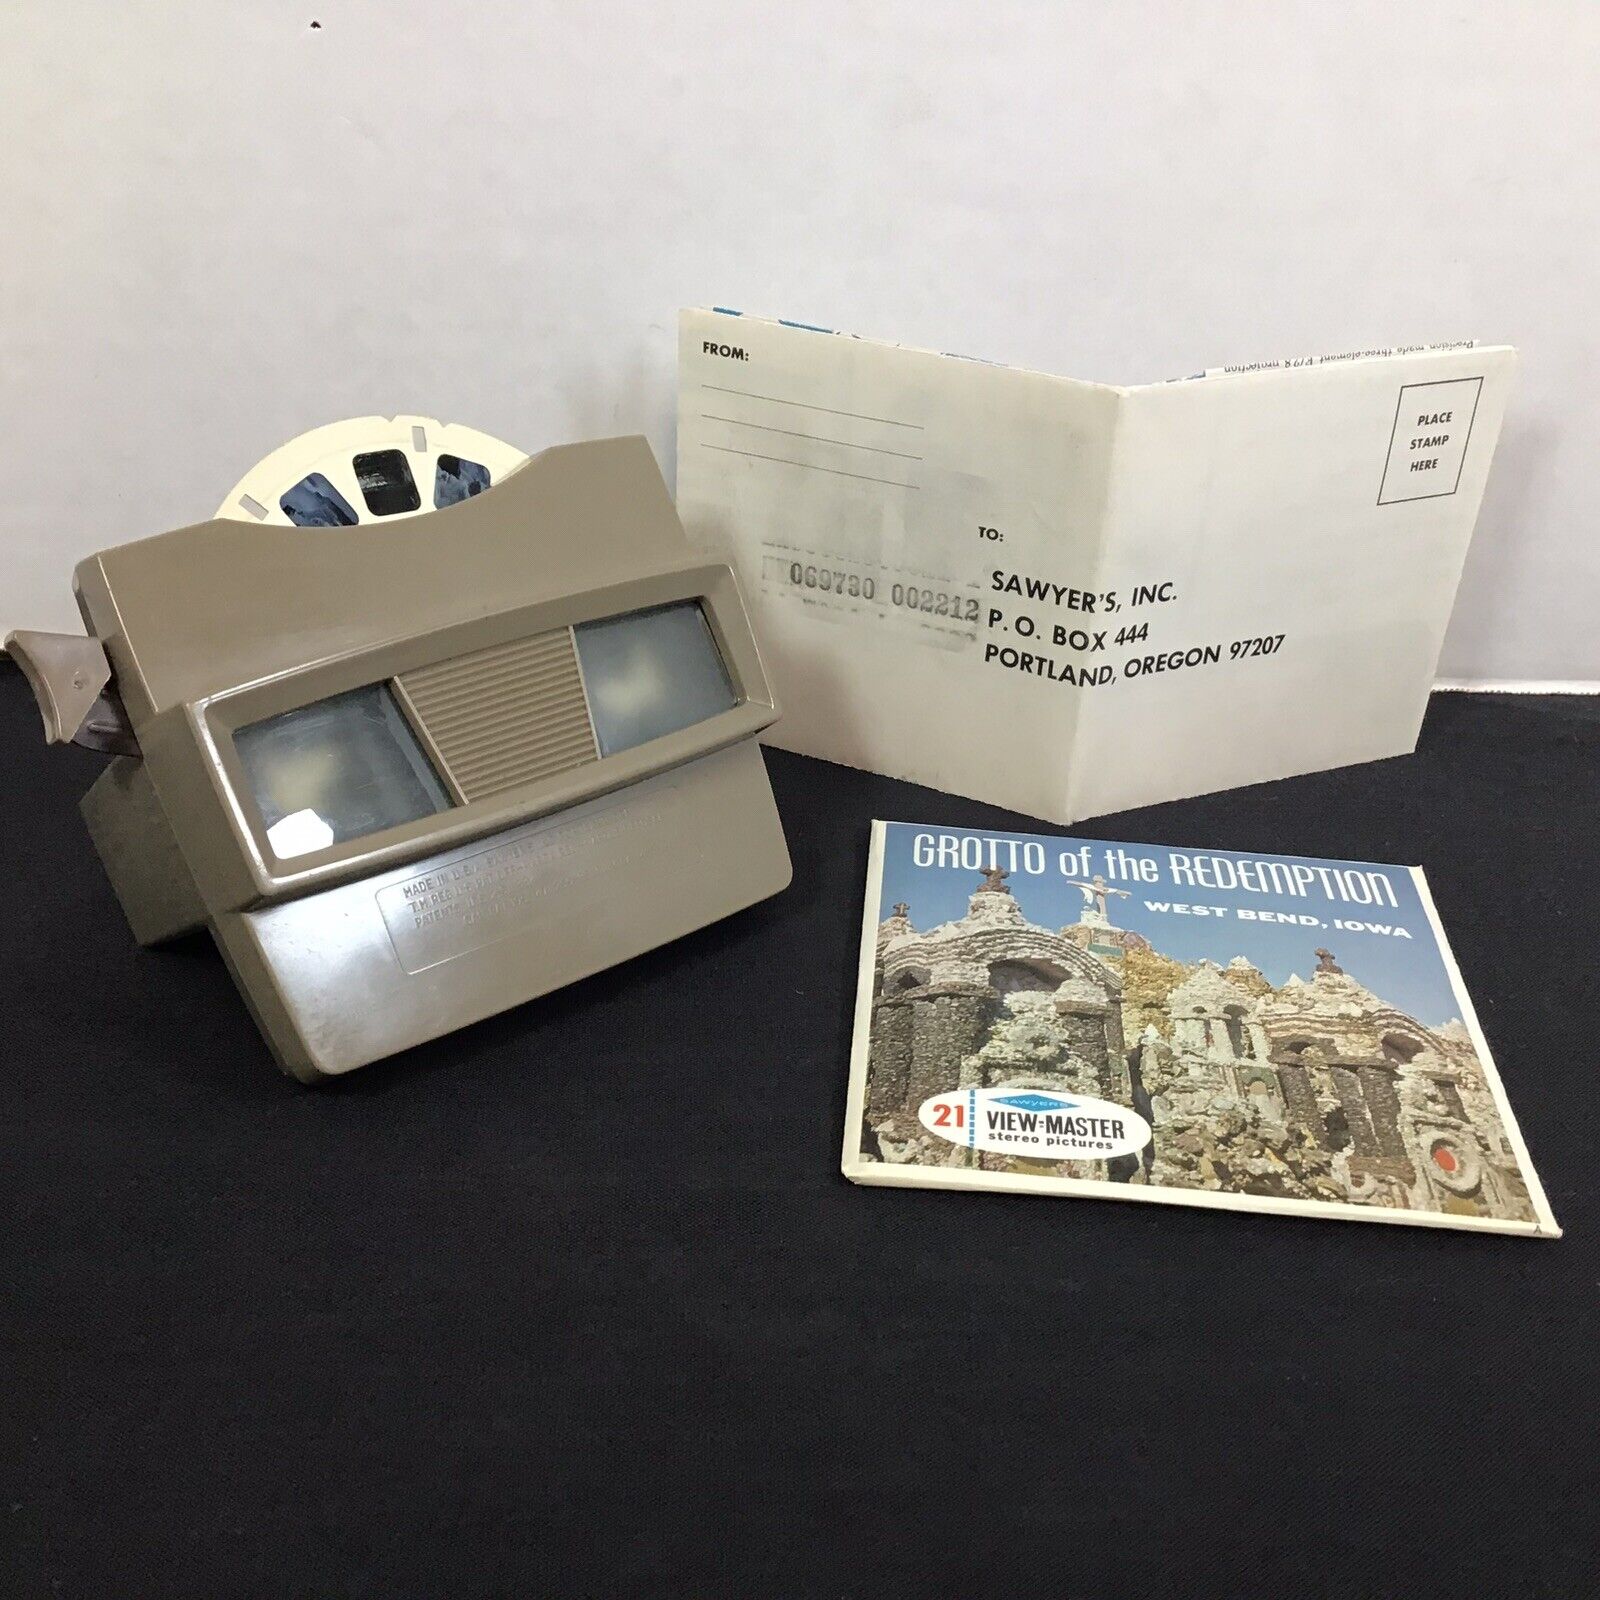 Sawyer’s View Master Viewer Tan Vintage 1970s w Grotto of Redemption Pictures